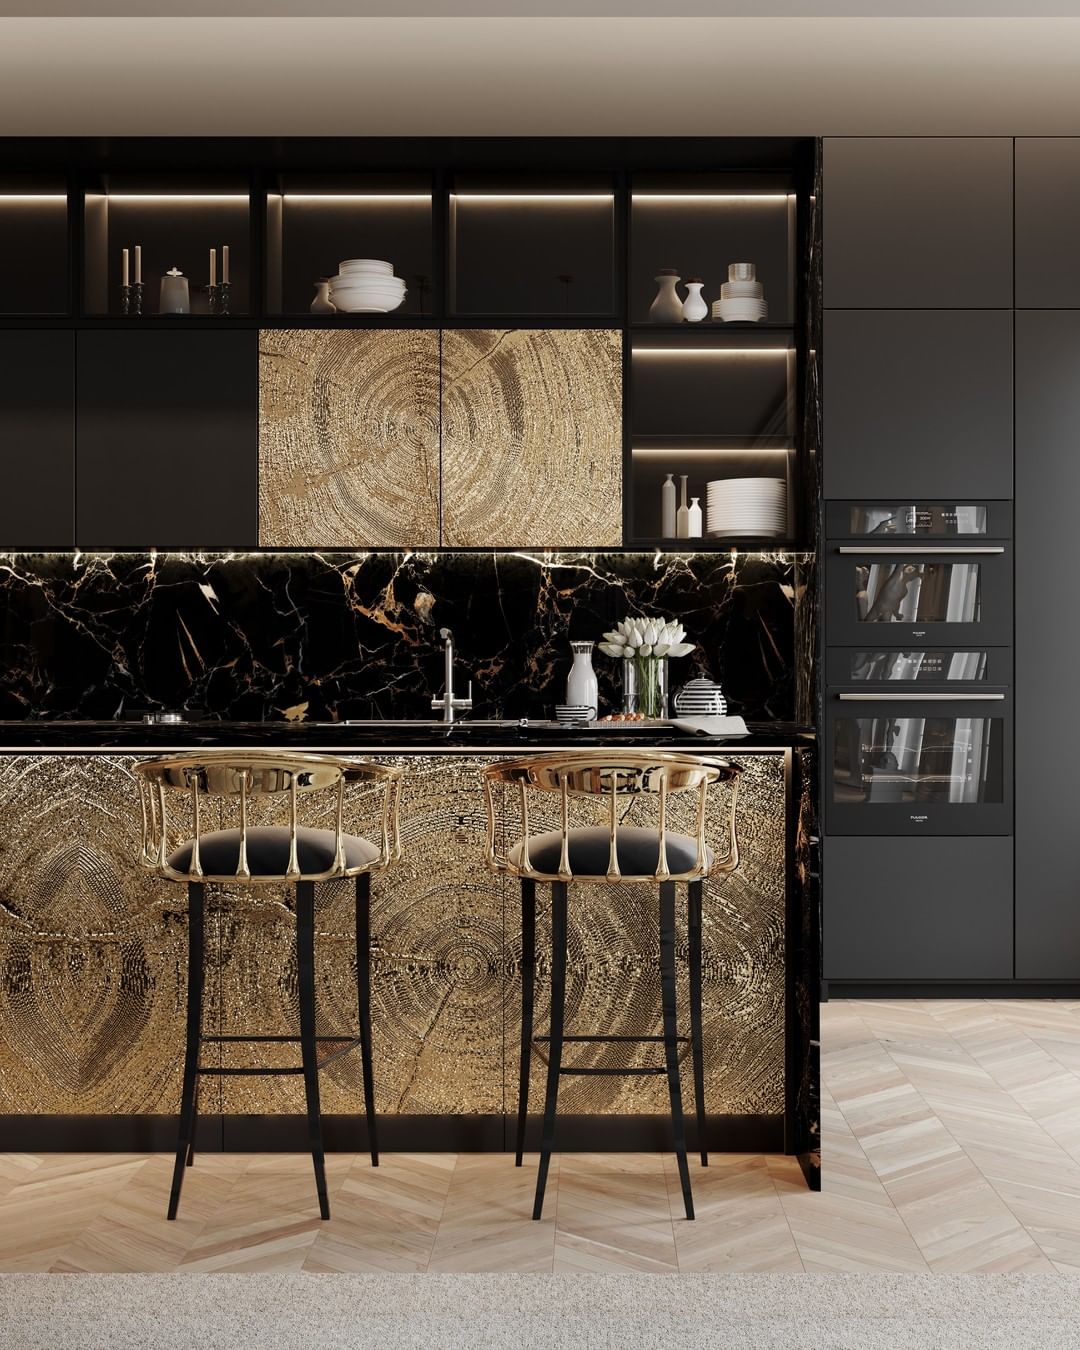 Contemplate These Powerful Kitchen And Dining Room Inspirations